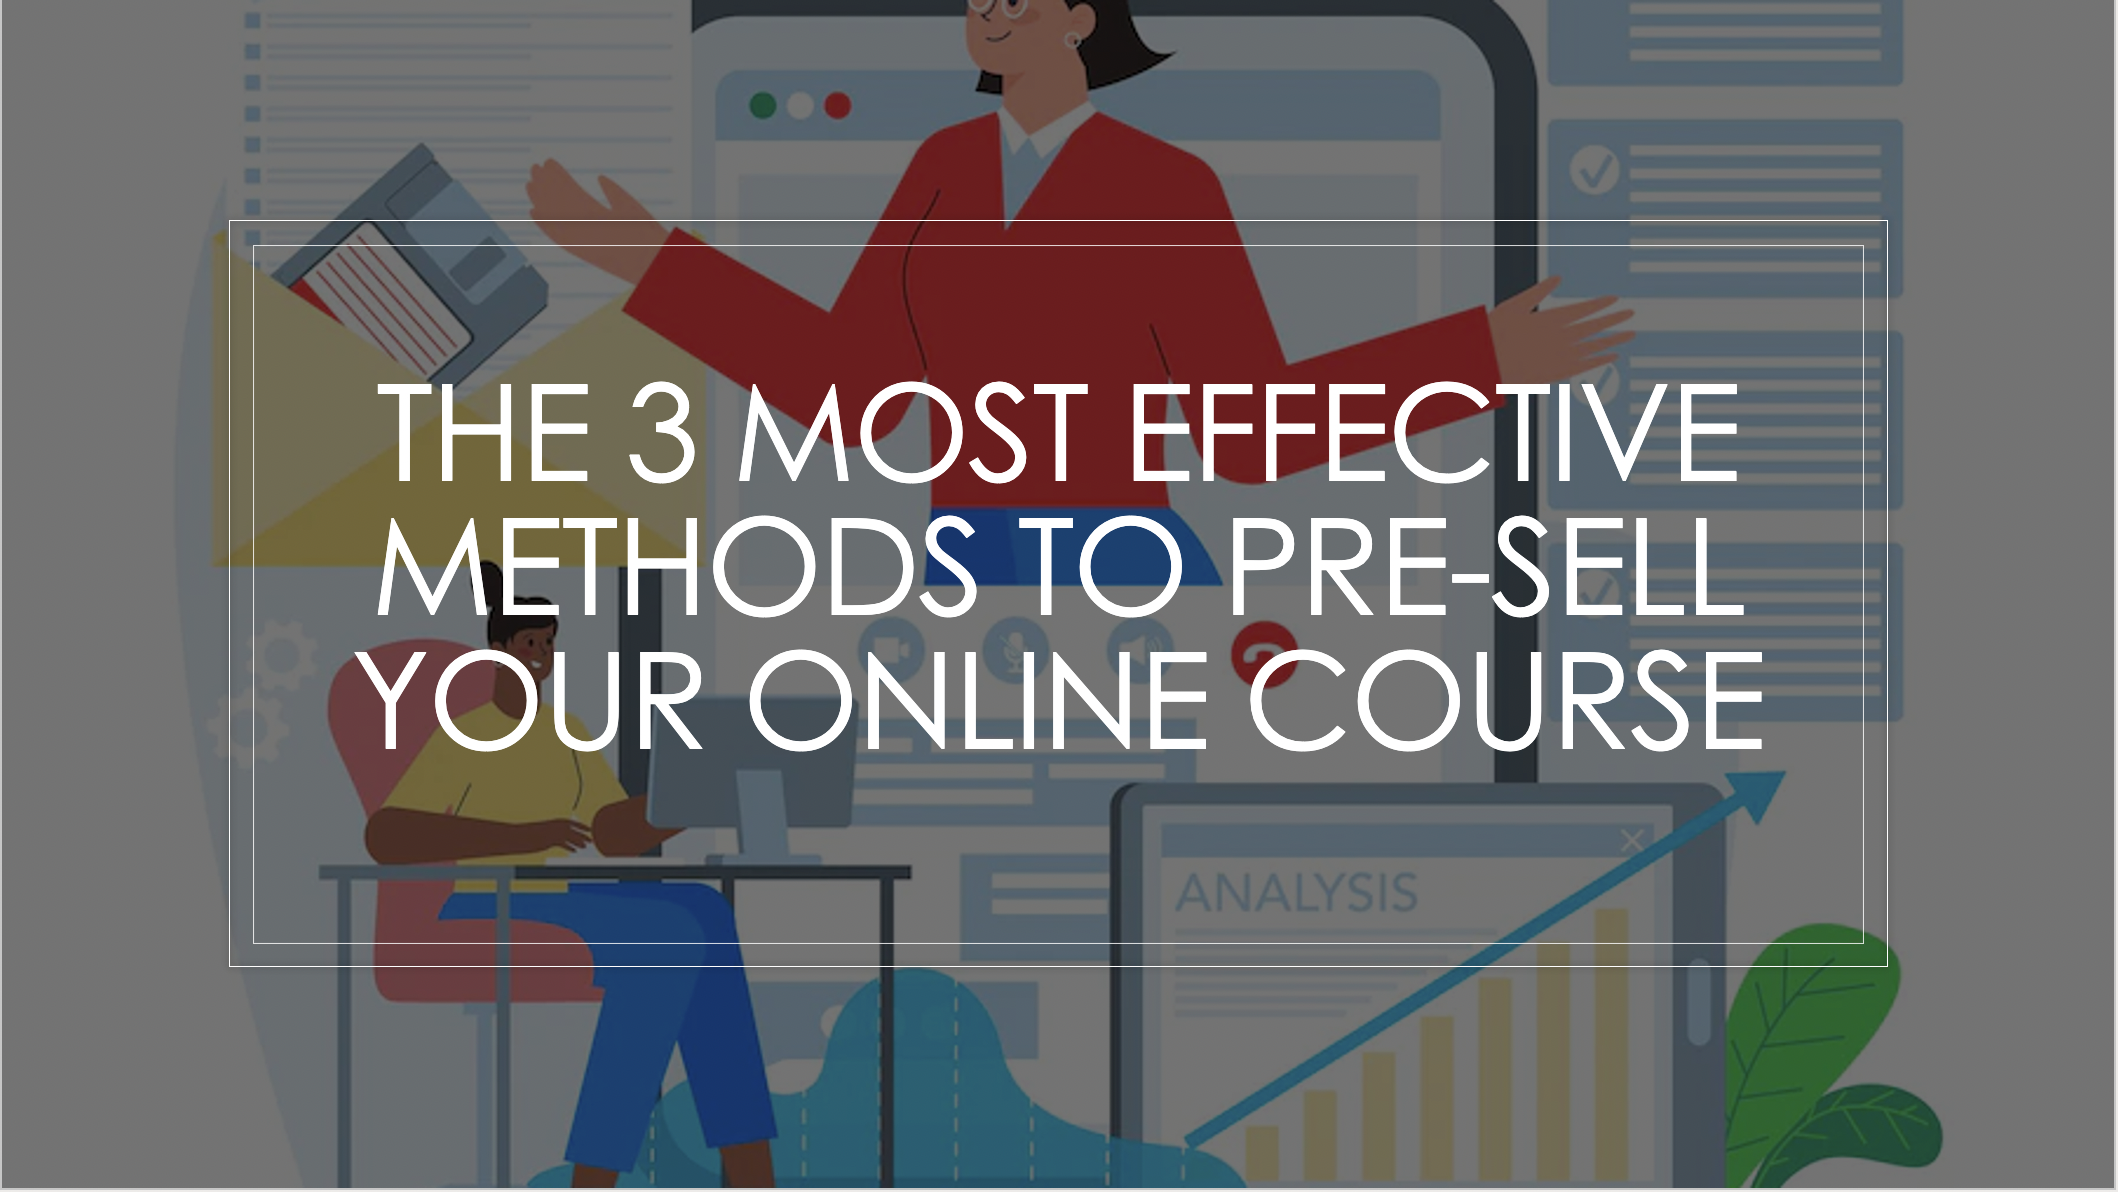 The 3 Most Effective Methods to Pre-Sell Your Online Course